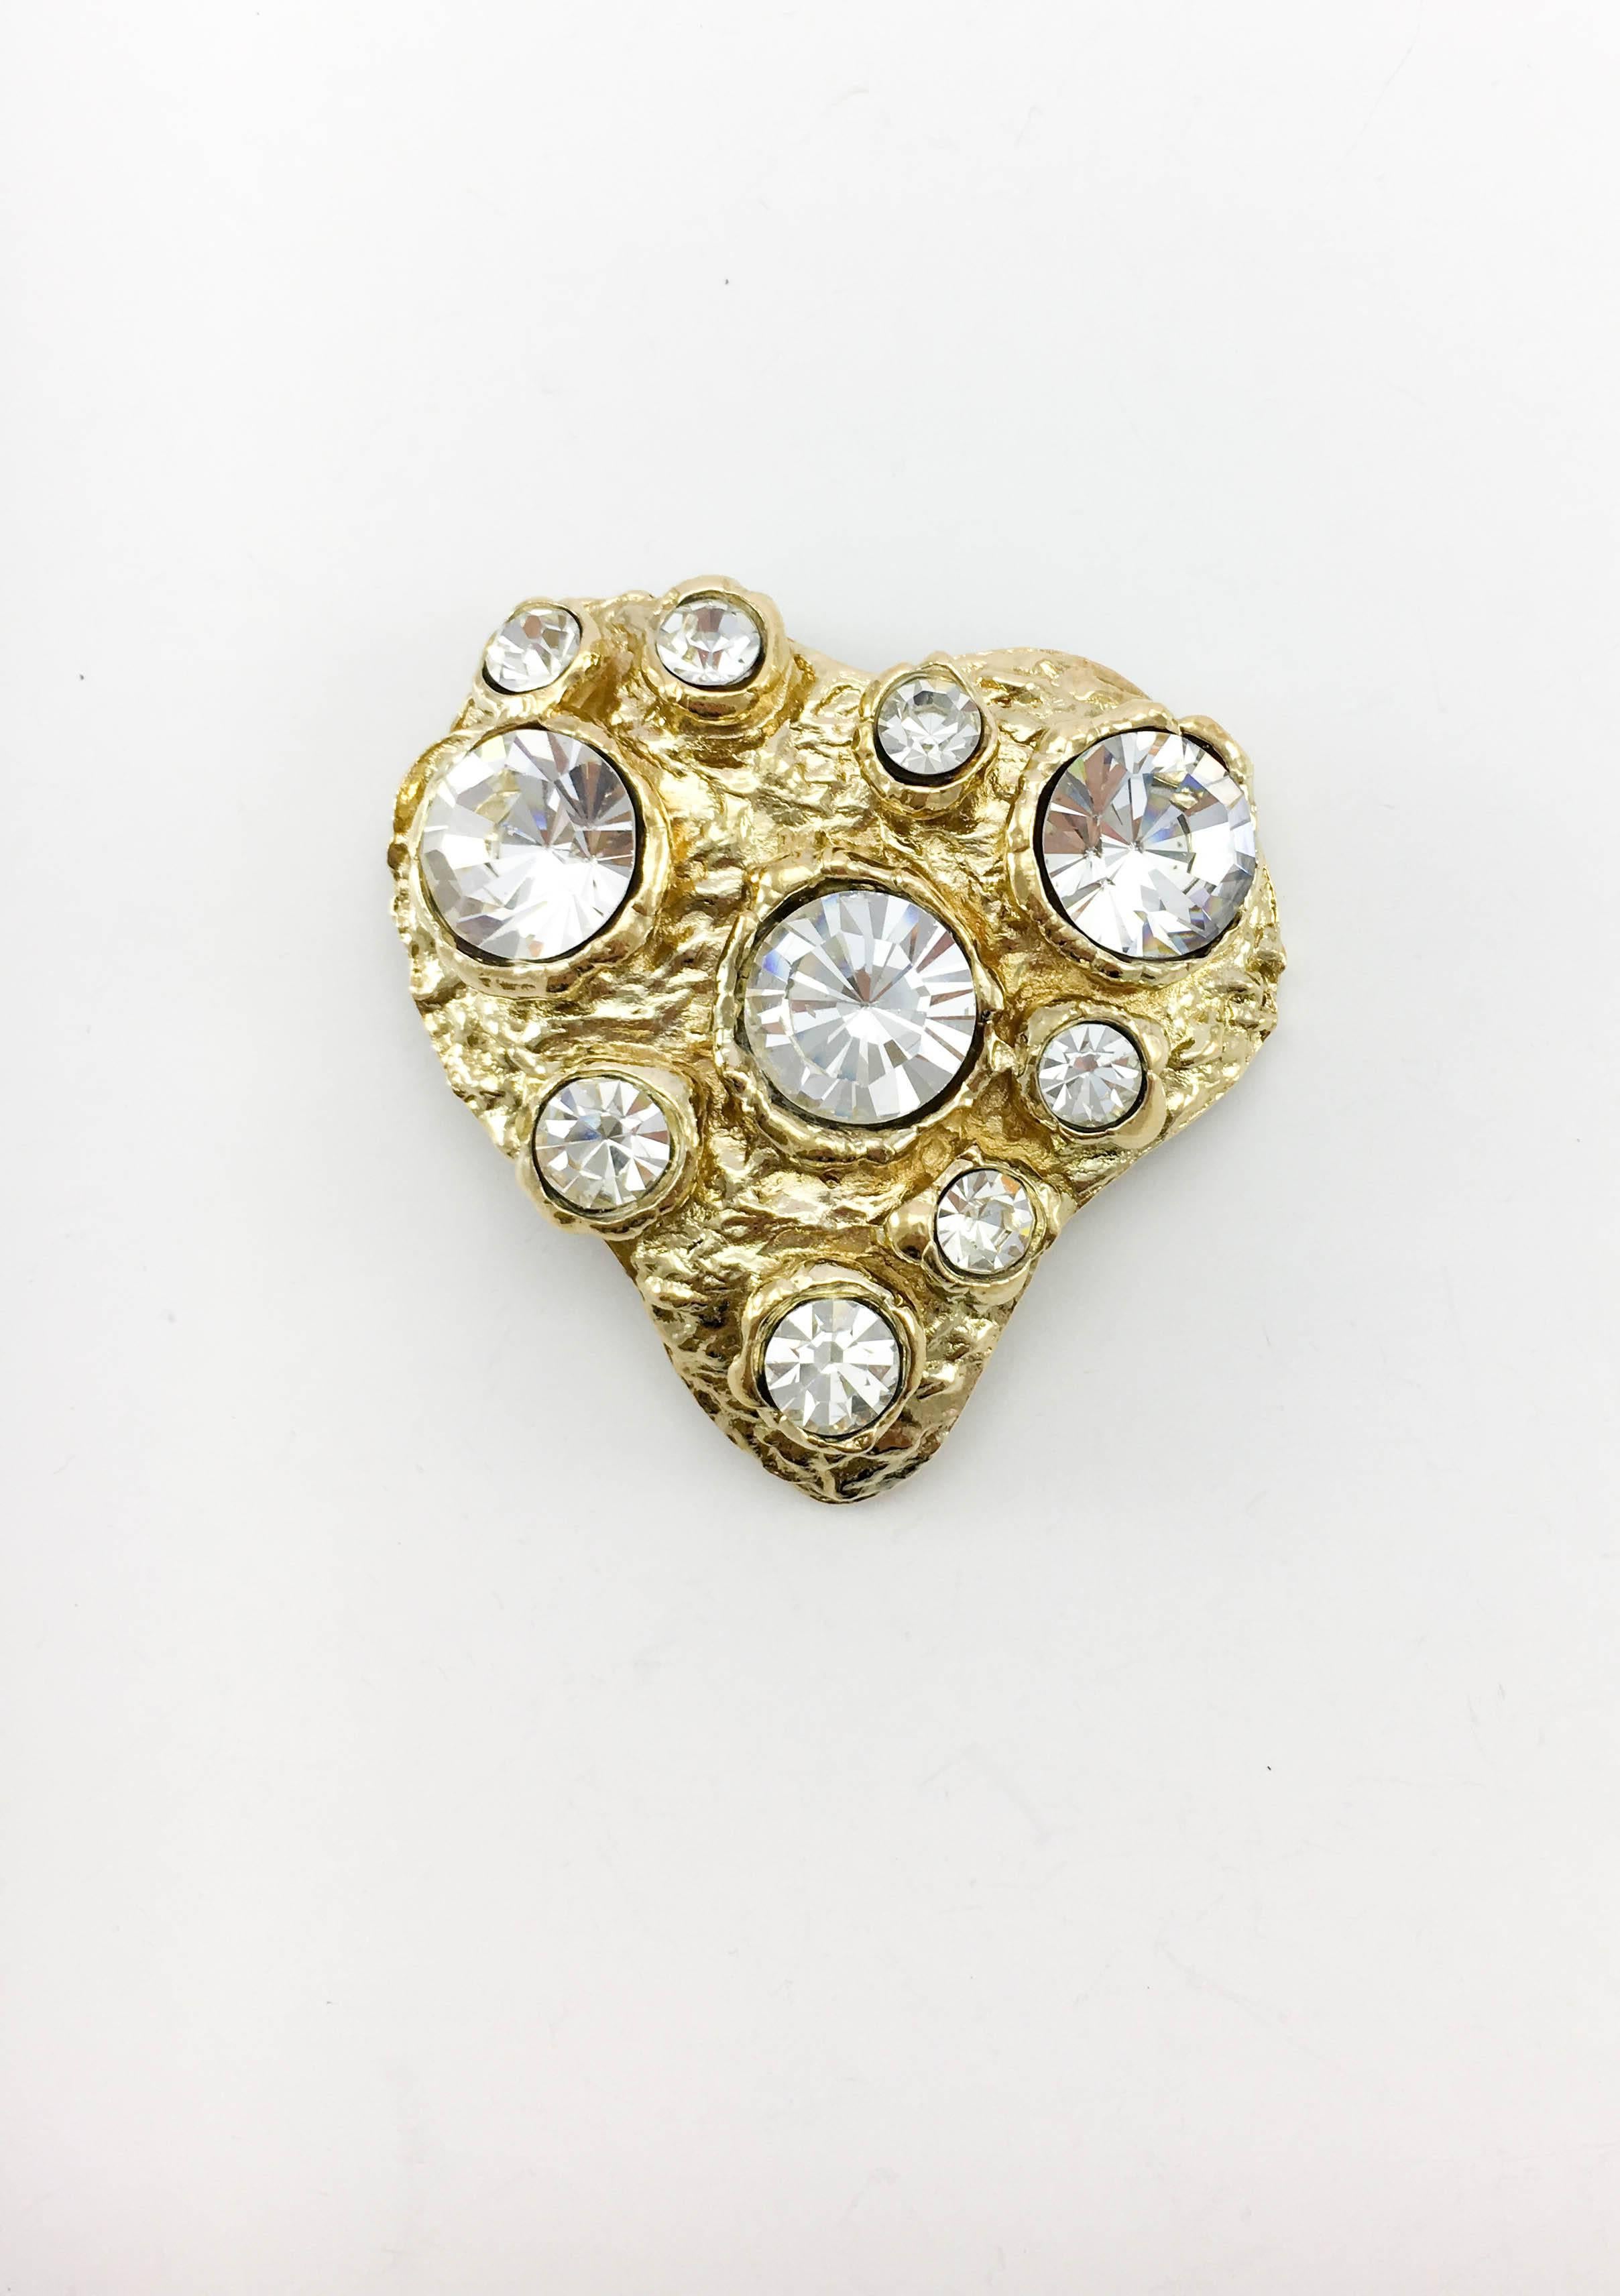 1980s Lacroix Crystal Embellished Gold-Plated Heart Brooch In Excellent Condition In London, Chelsea